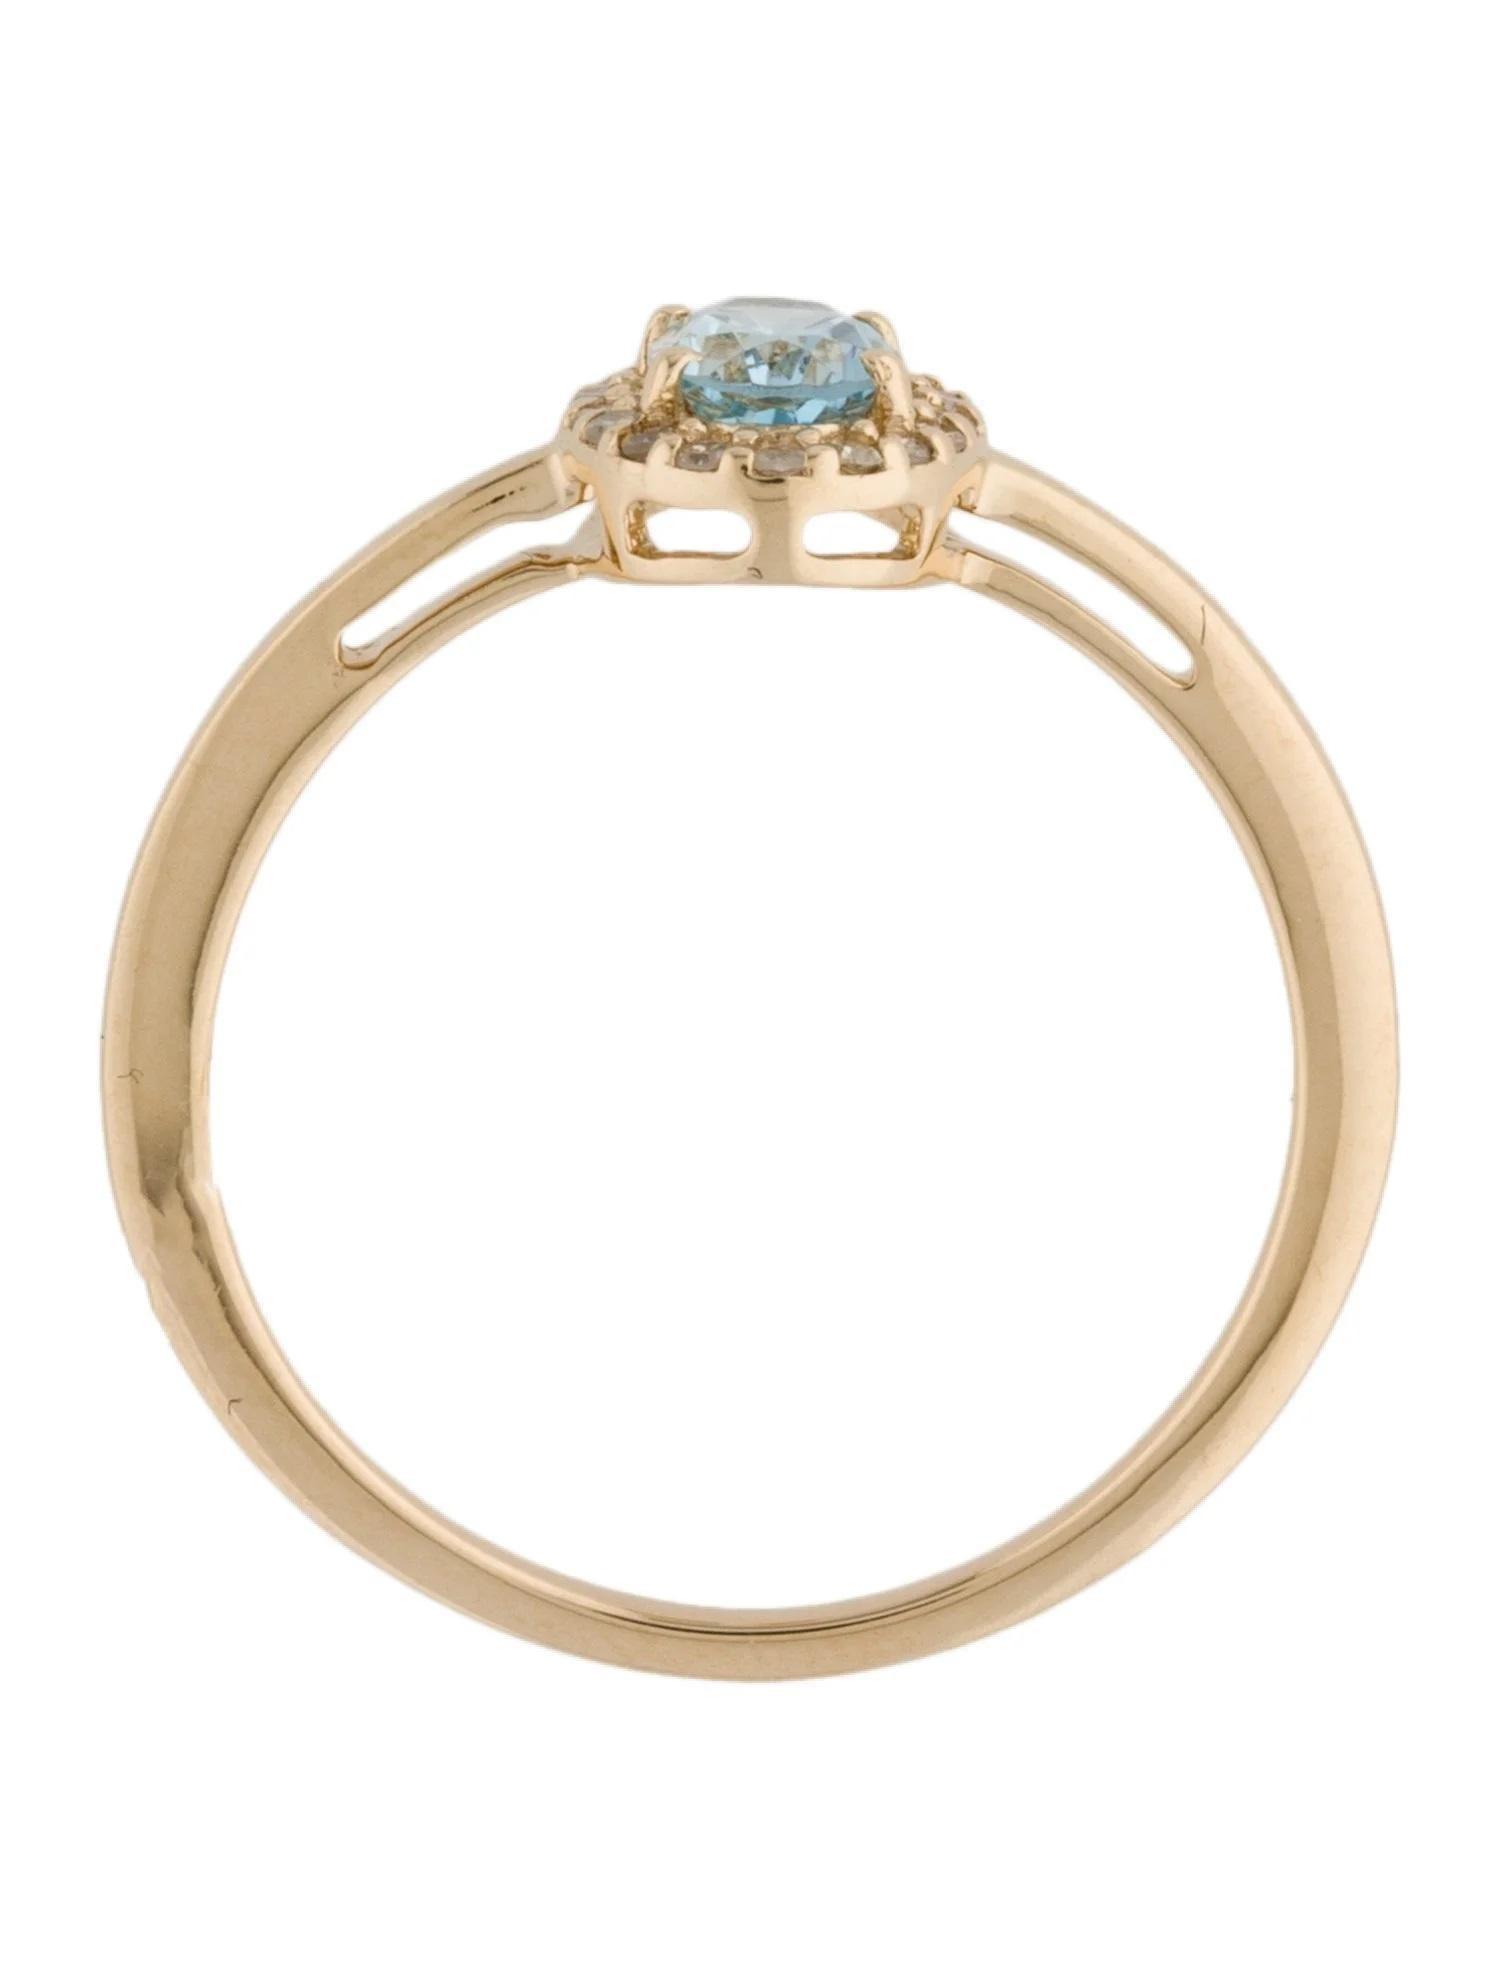 14K Aquamarine & Diamond Cocktail Ring - 0.43 Carat Oval Modified Brilliant Aqua In New Condition For Sale In Holtsville, NY